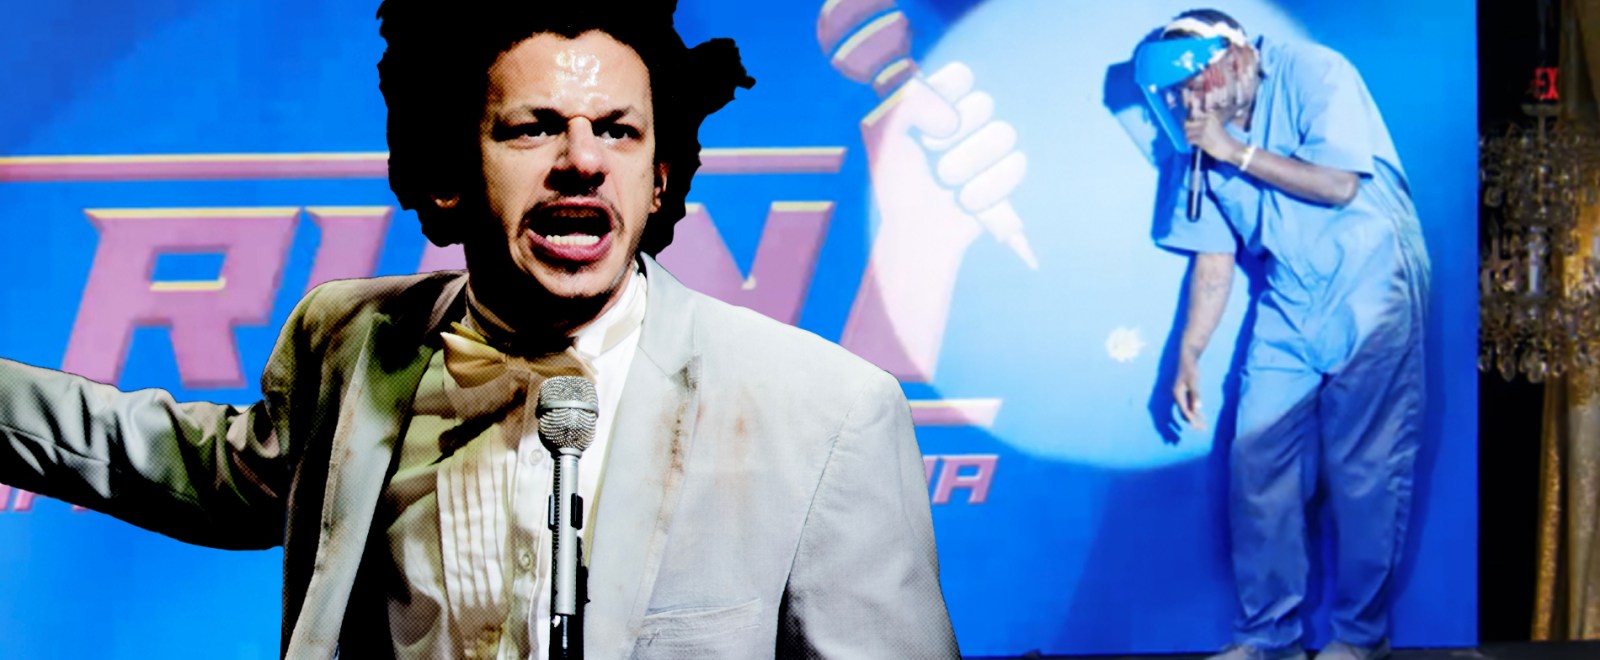 Inside The Wild World Of ‘The Eric Andre Show’ And Rapper Warrior Ninja